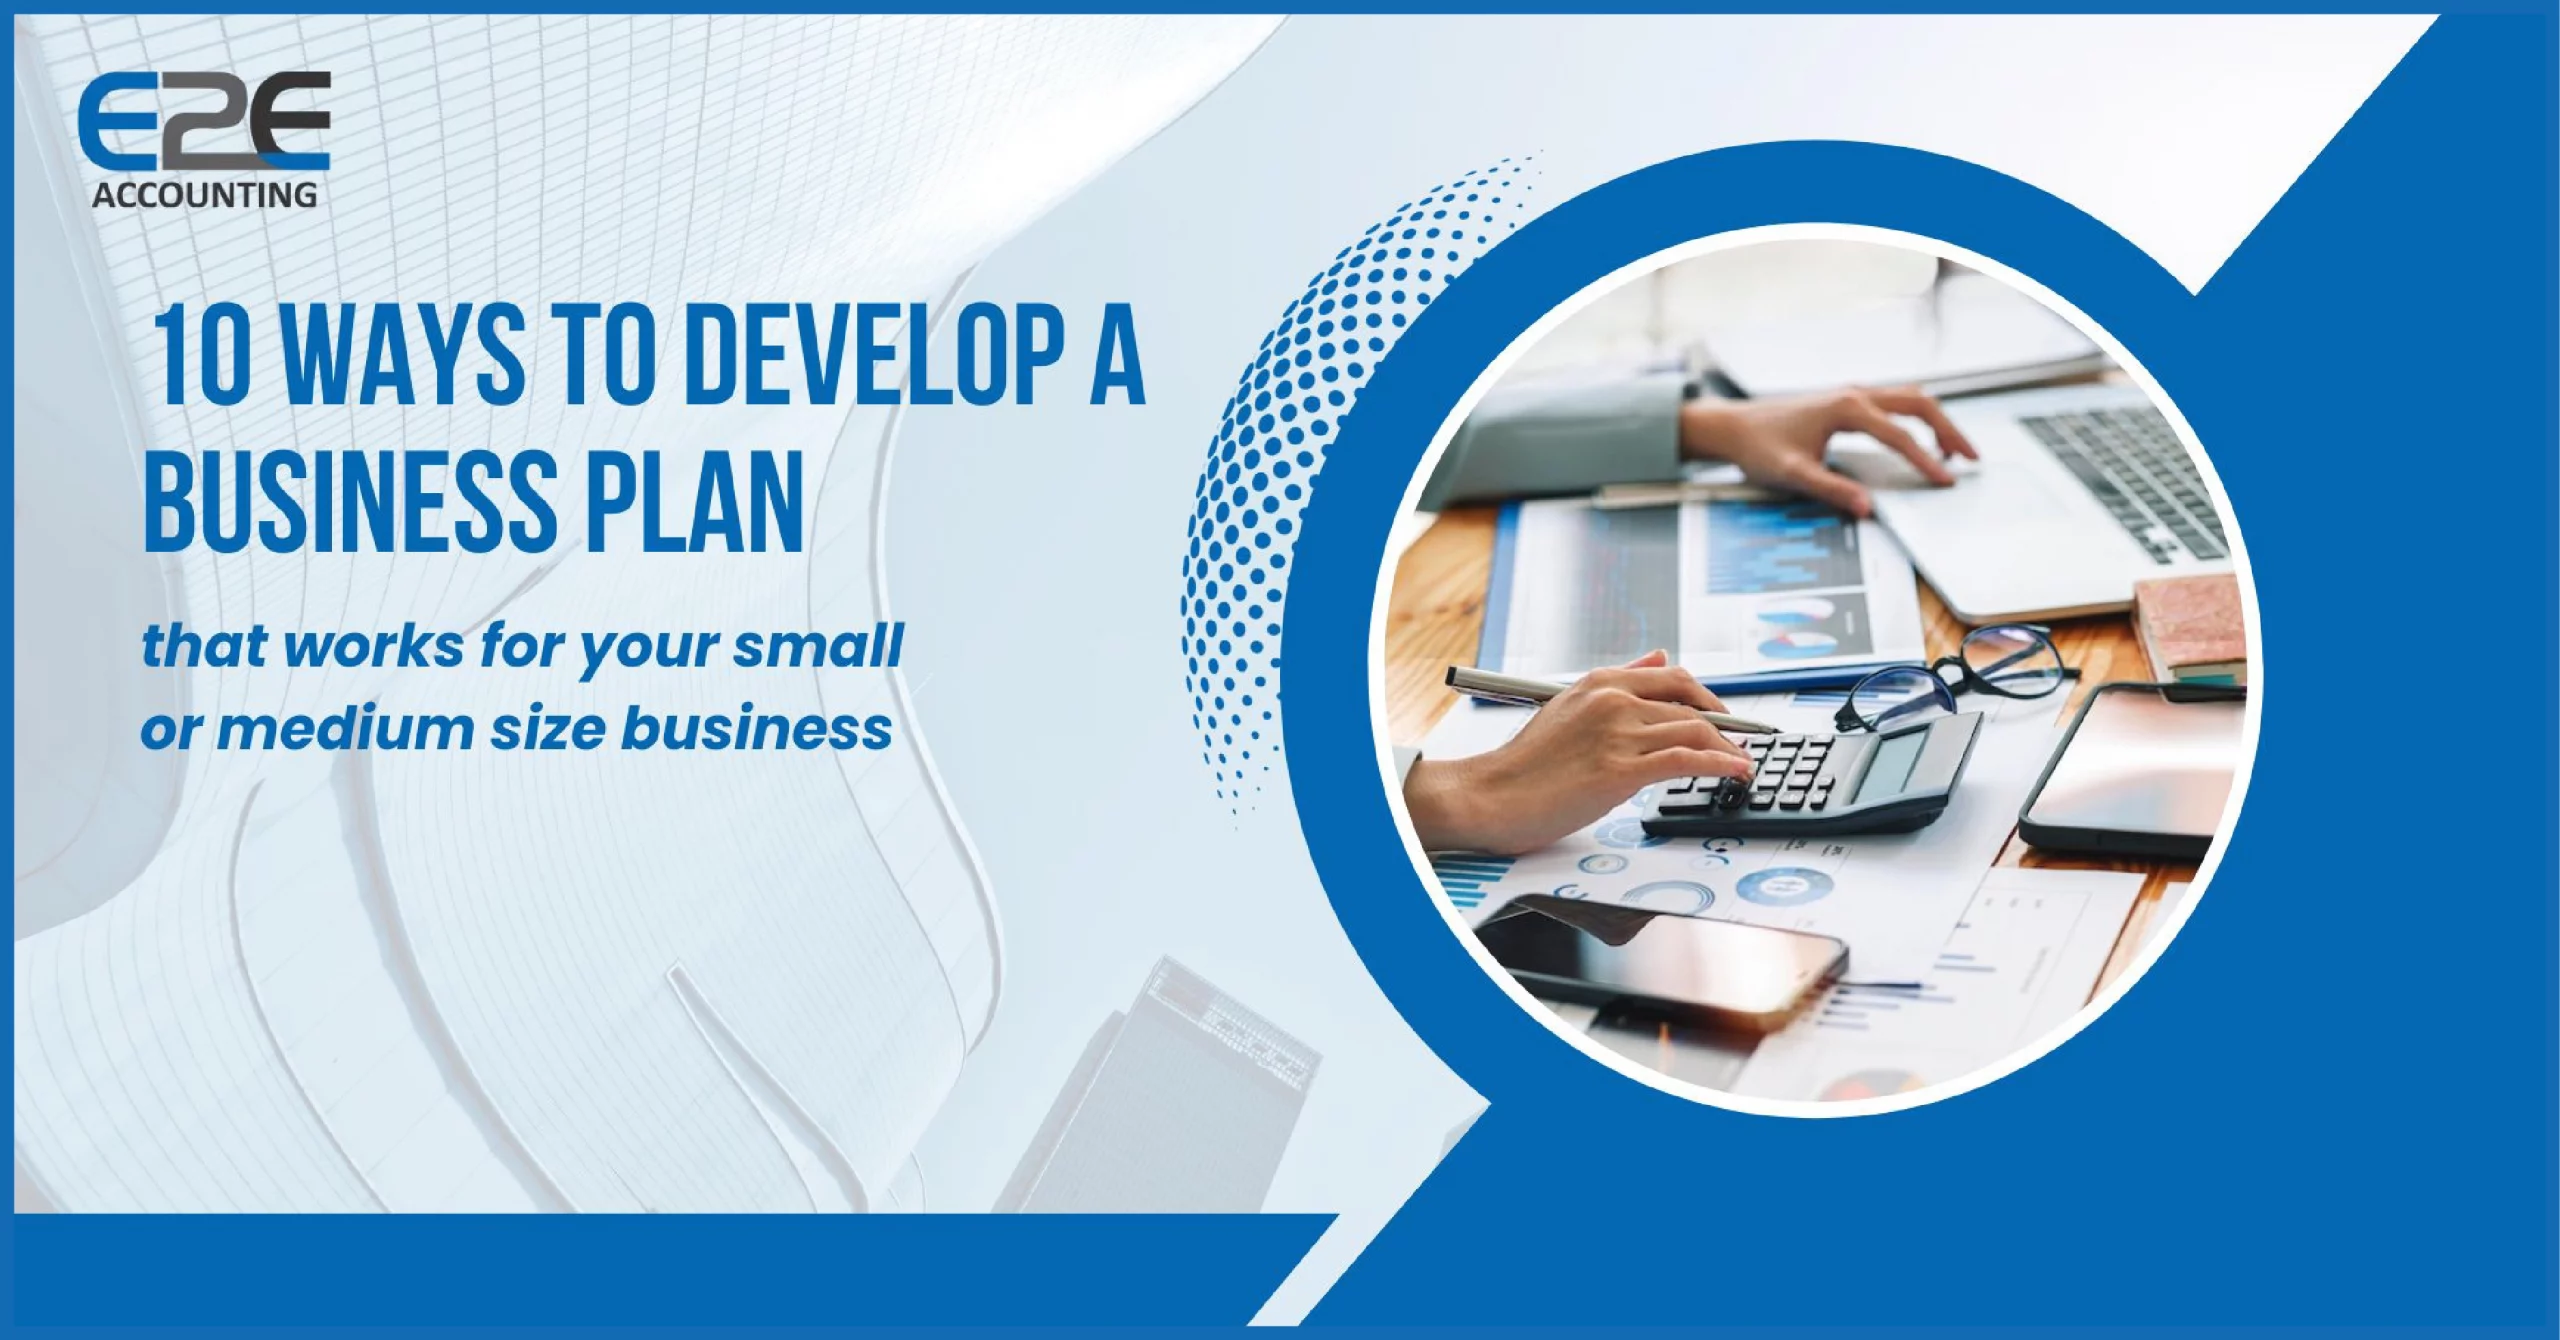 10 Ways to develop a business plan that works for your small